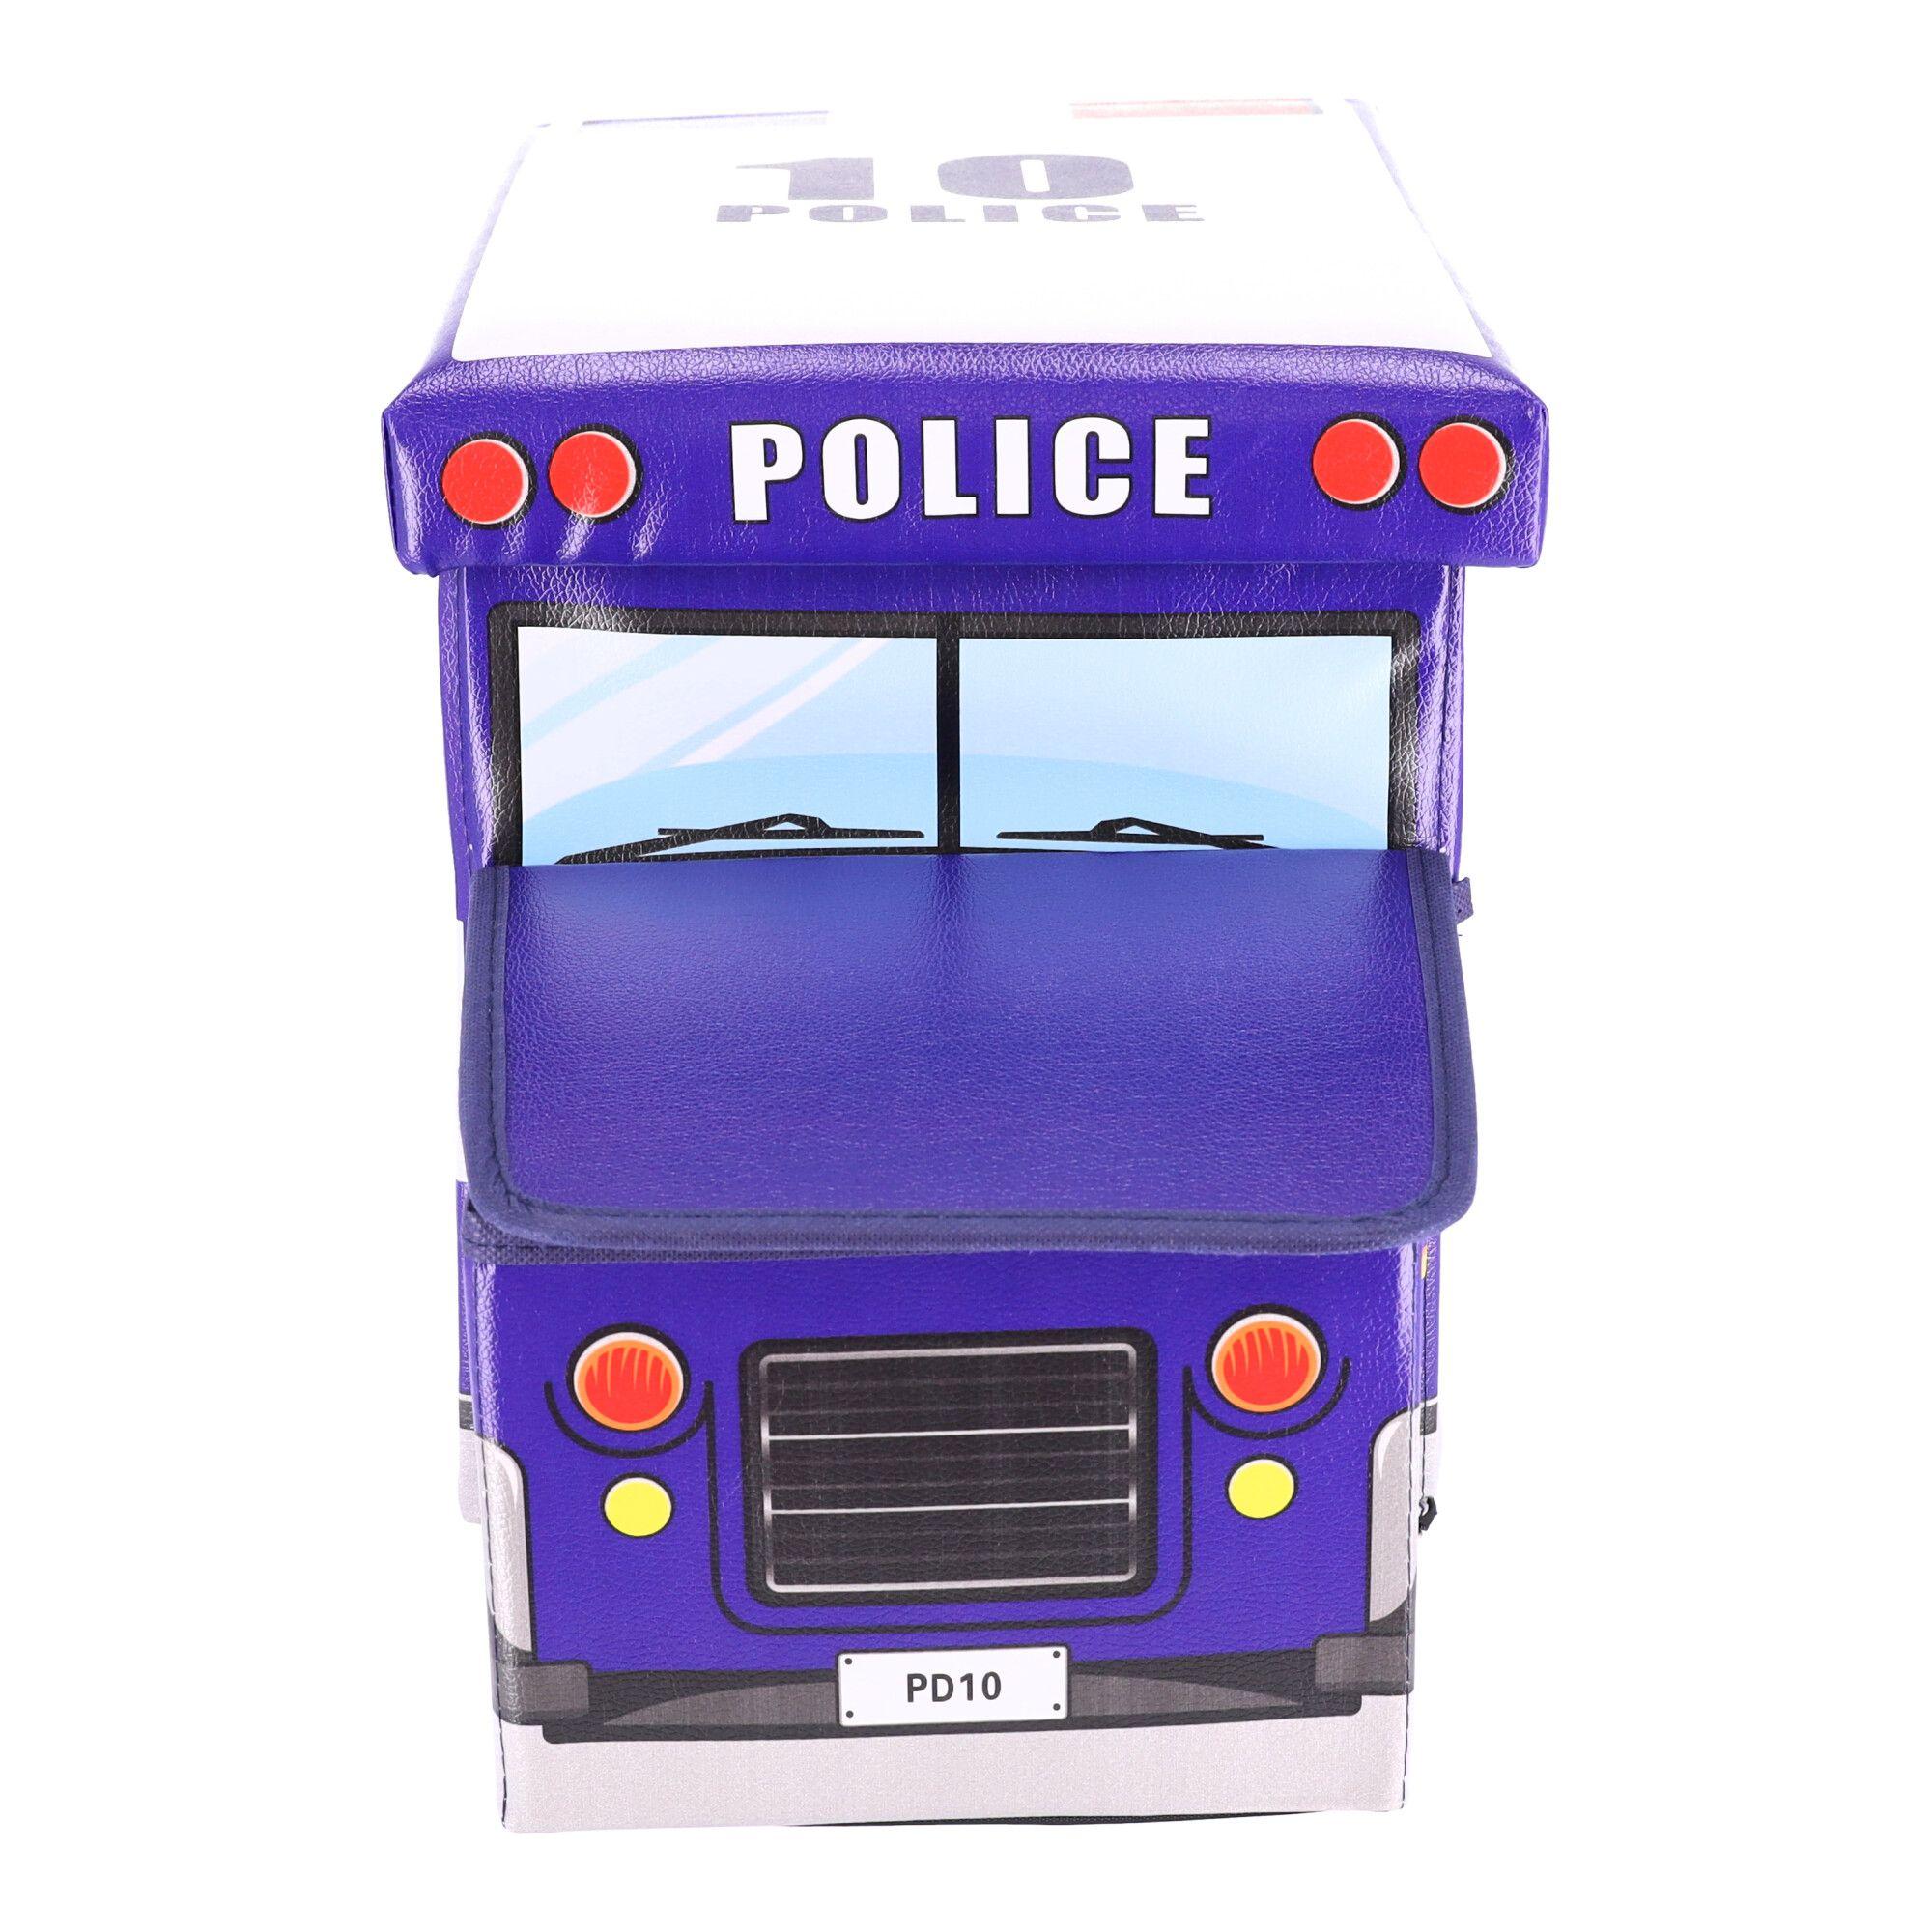 Container for toys with a pouffe - Police car